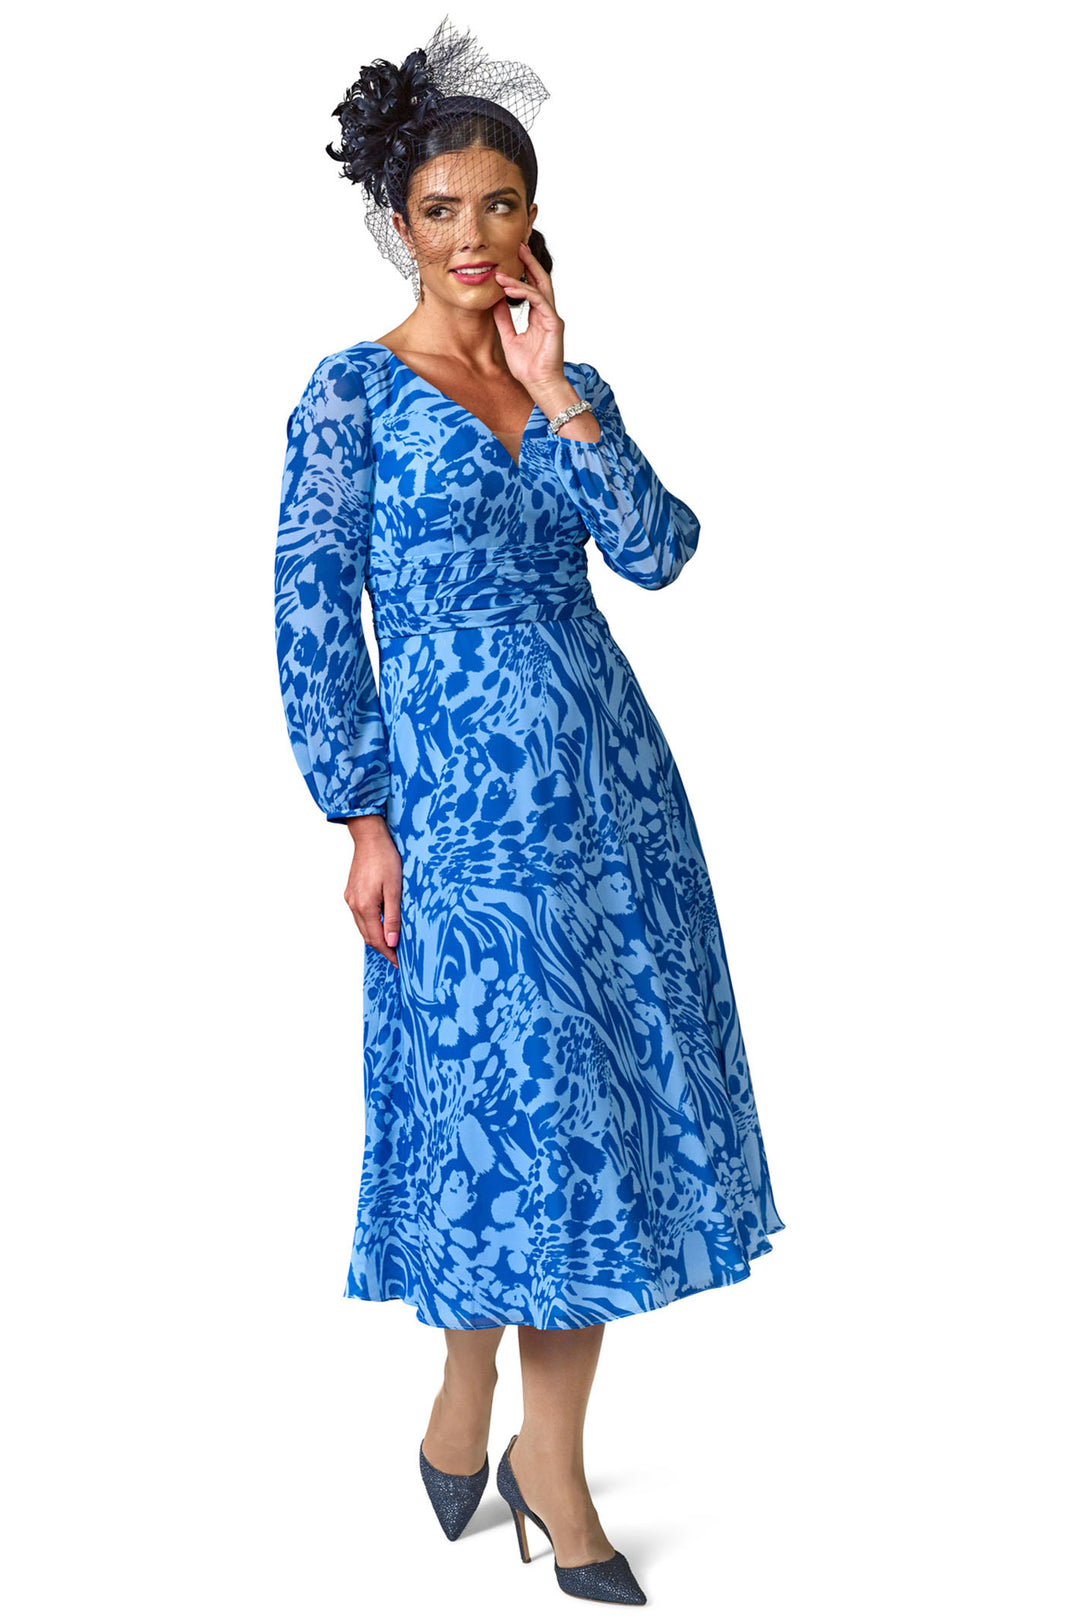 Veromia Occasions VO0236 Cobalt Wedgewood Long Sleeve Midi Dress - Rouge Boutique Inverness